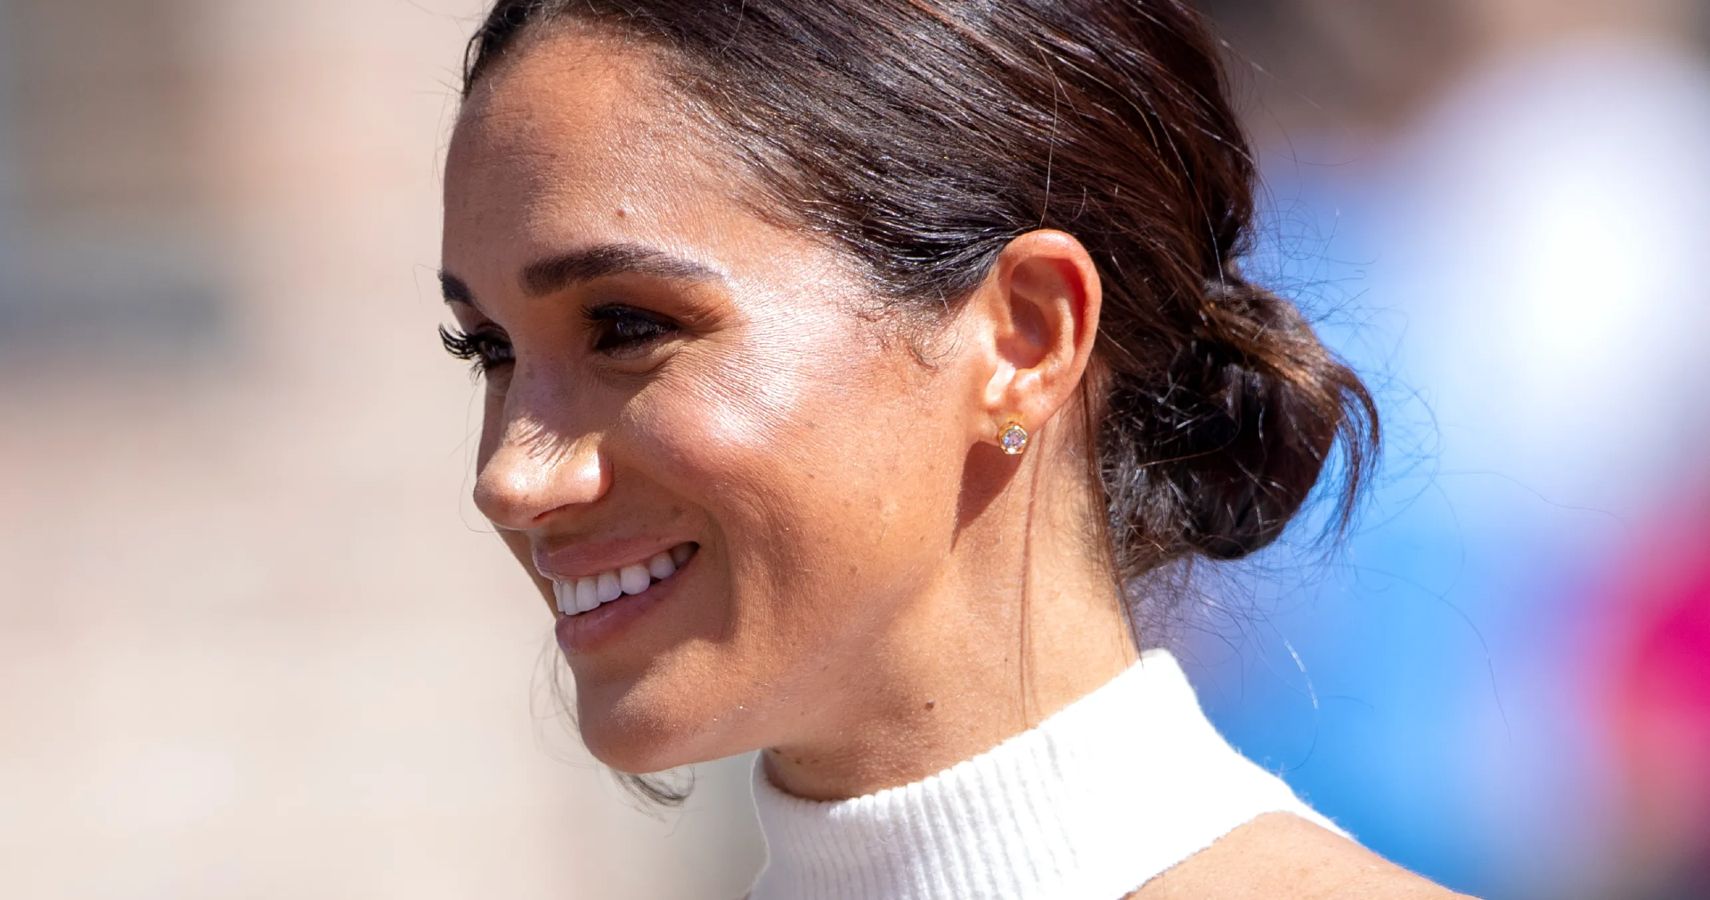 Meghan Markle Wore $25,000 Worth of Princess Diana’s Cartier